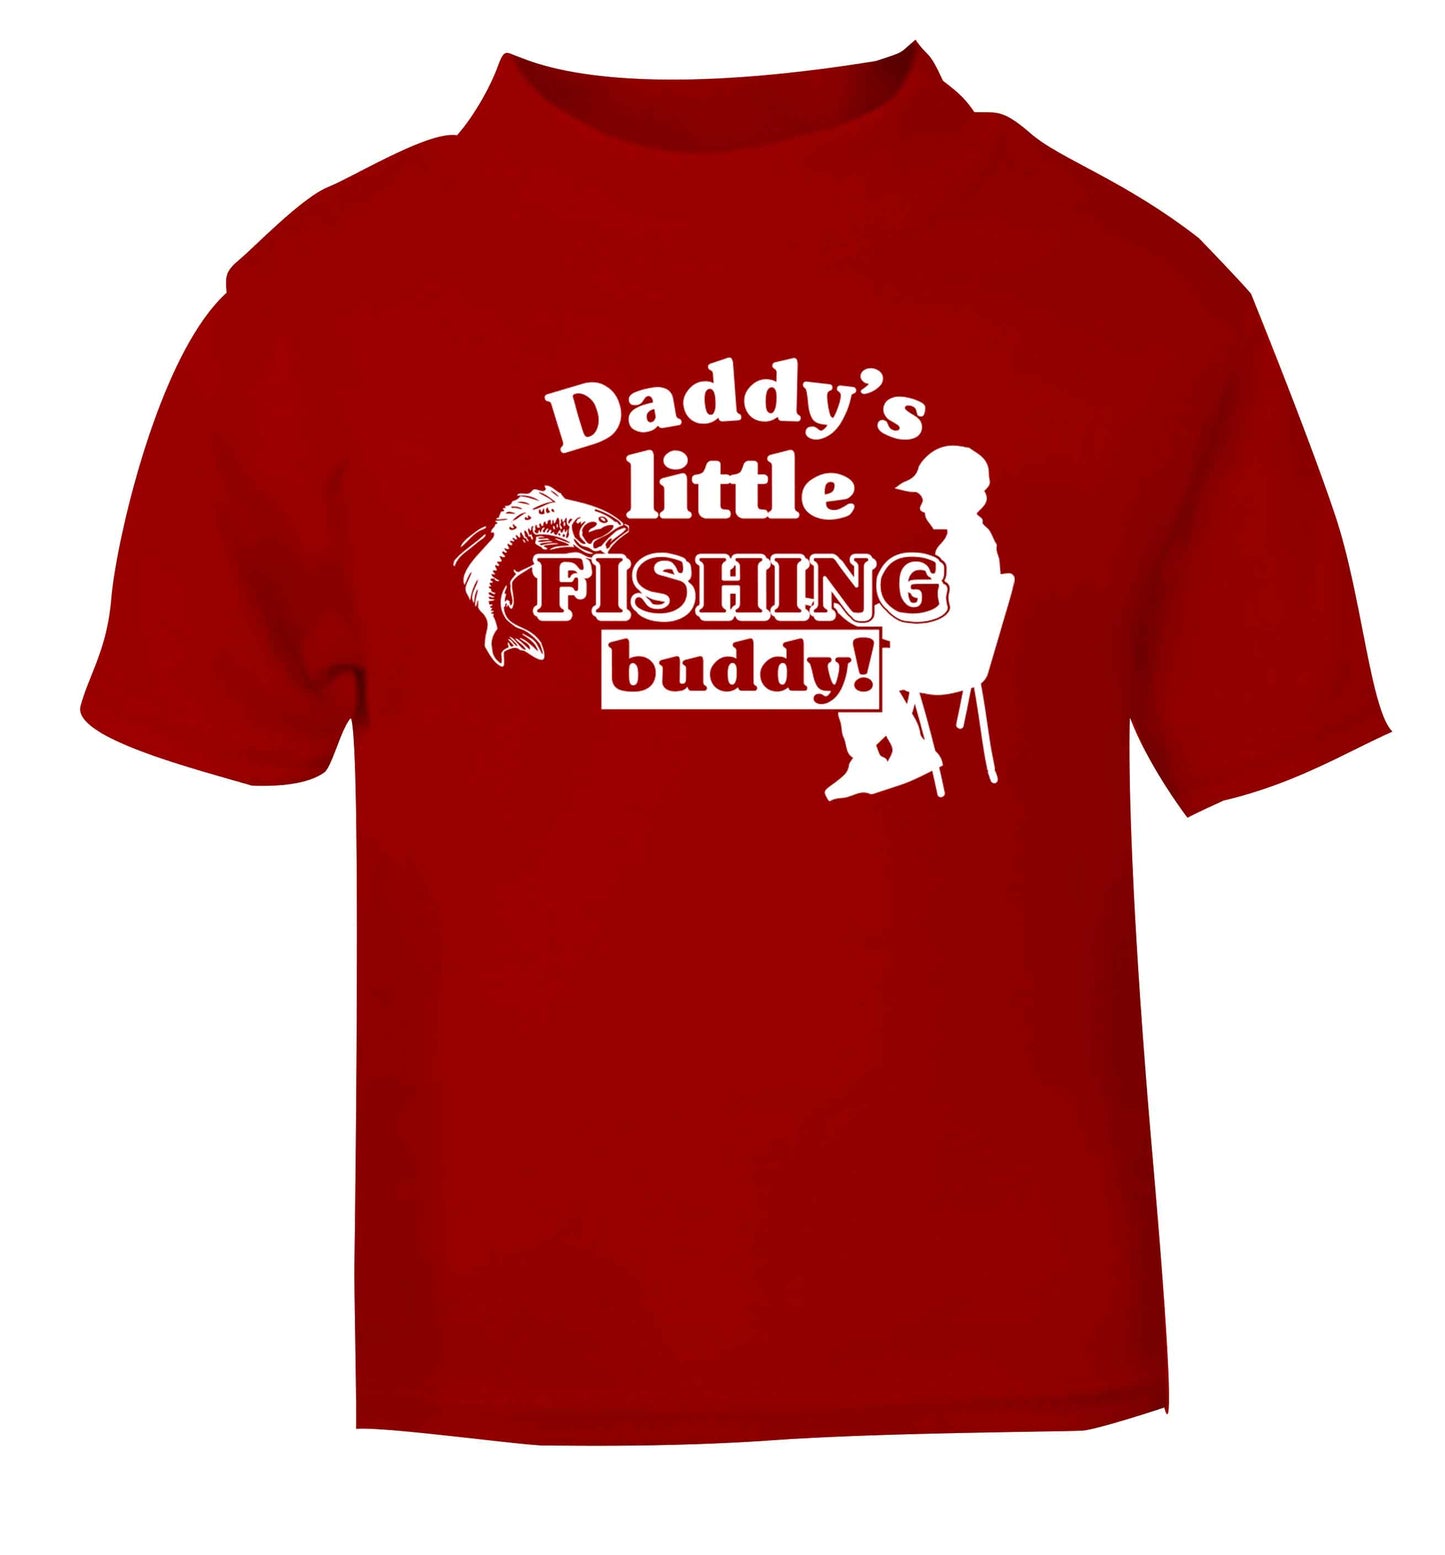 Daddy's little fishing buddy red Baby Toddler Tshirt 2 Years